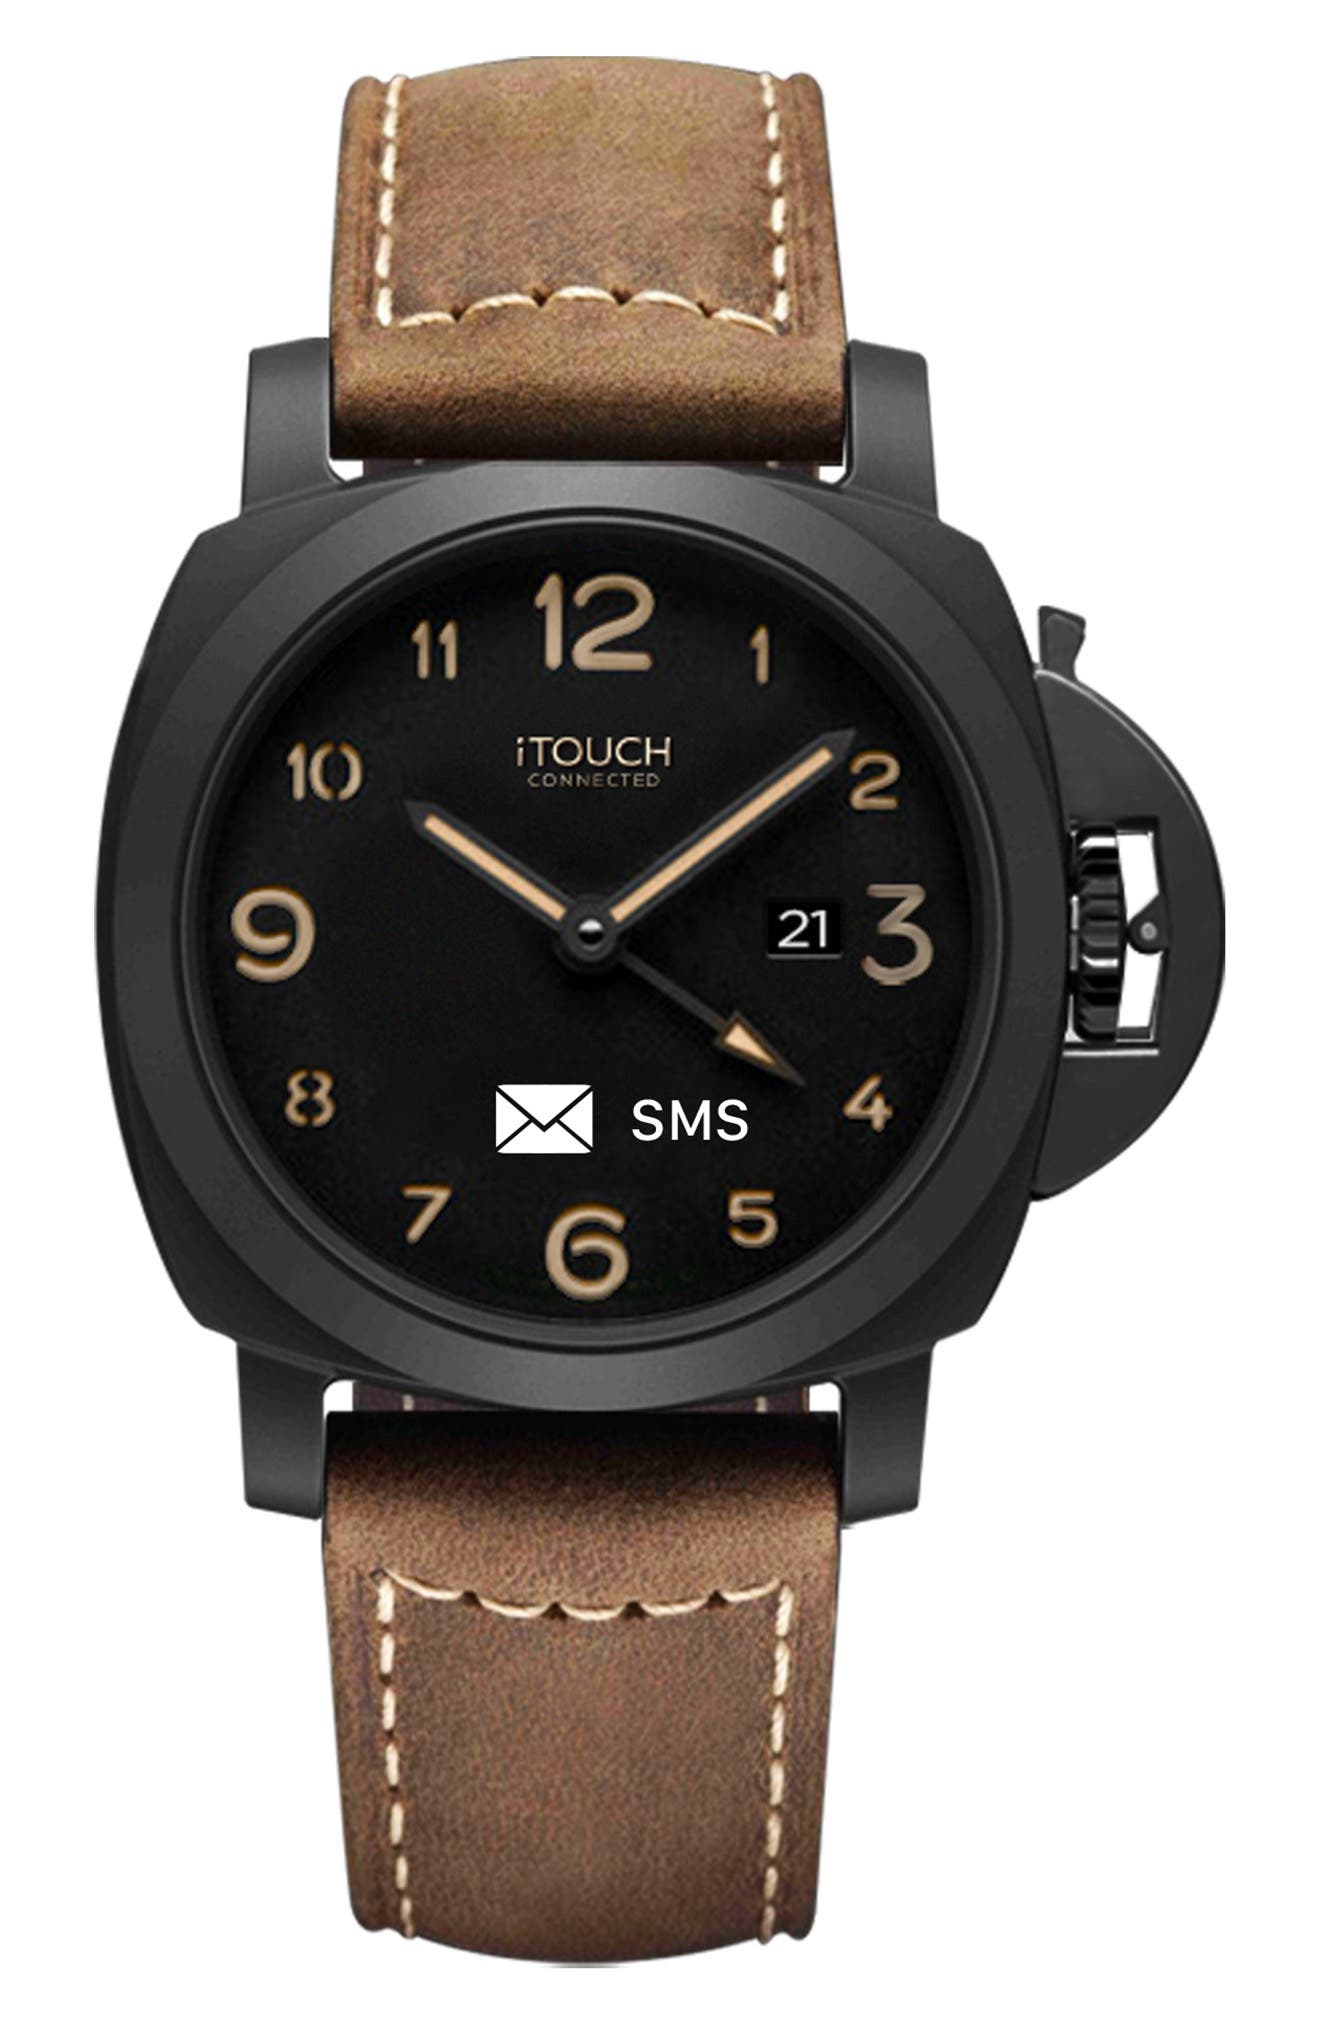 I TOUCH Men's iTouch Connected Hybrid Smartwatch Fitness Tracker: Black Case with Brown Leather Strap, 42mm | Nordstromrack